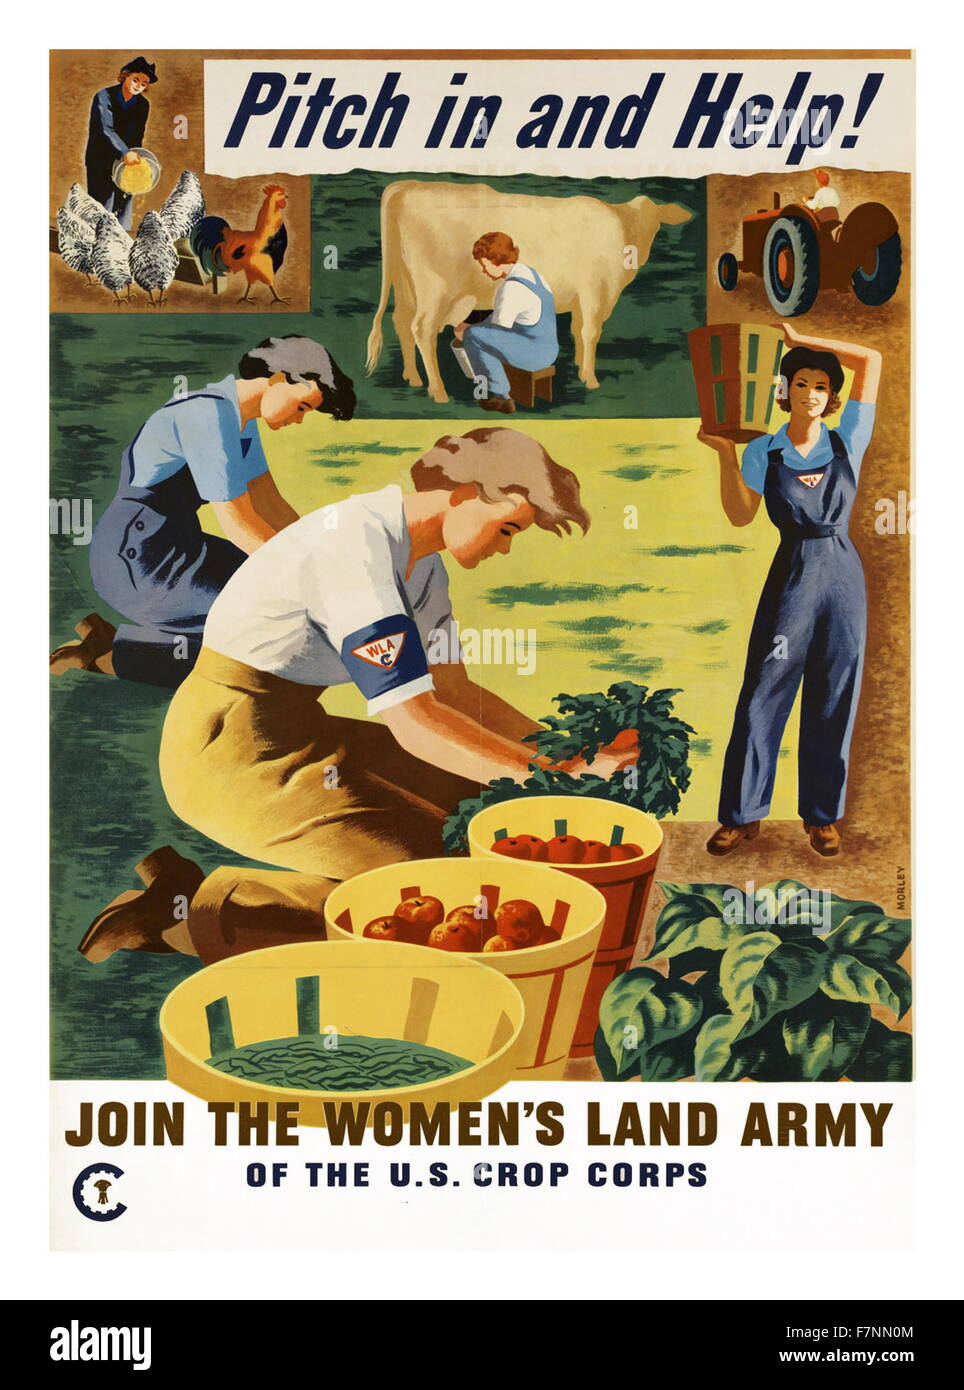 Propaganda poster from WWII advertising the importance of helping the war effort through joining the Women's Land Army. Stock Photo